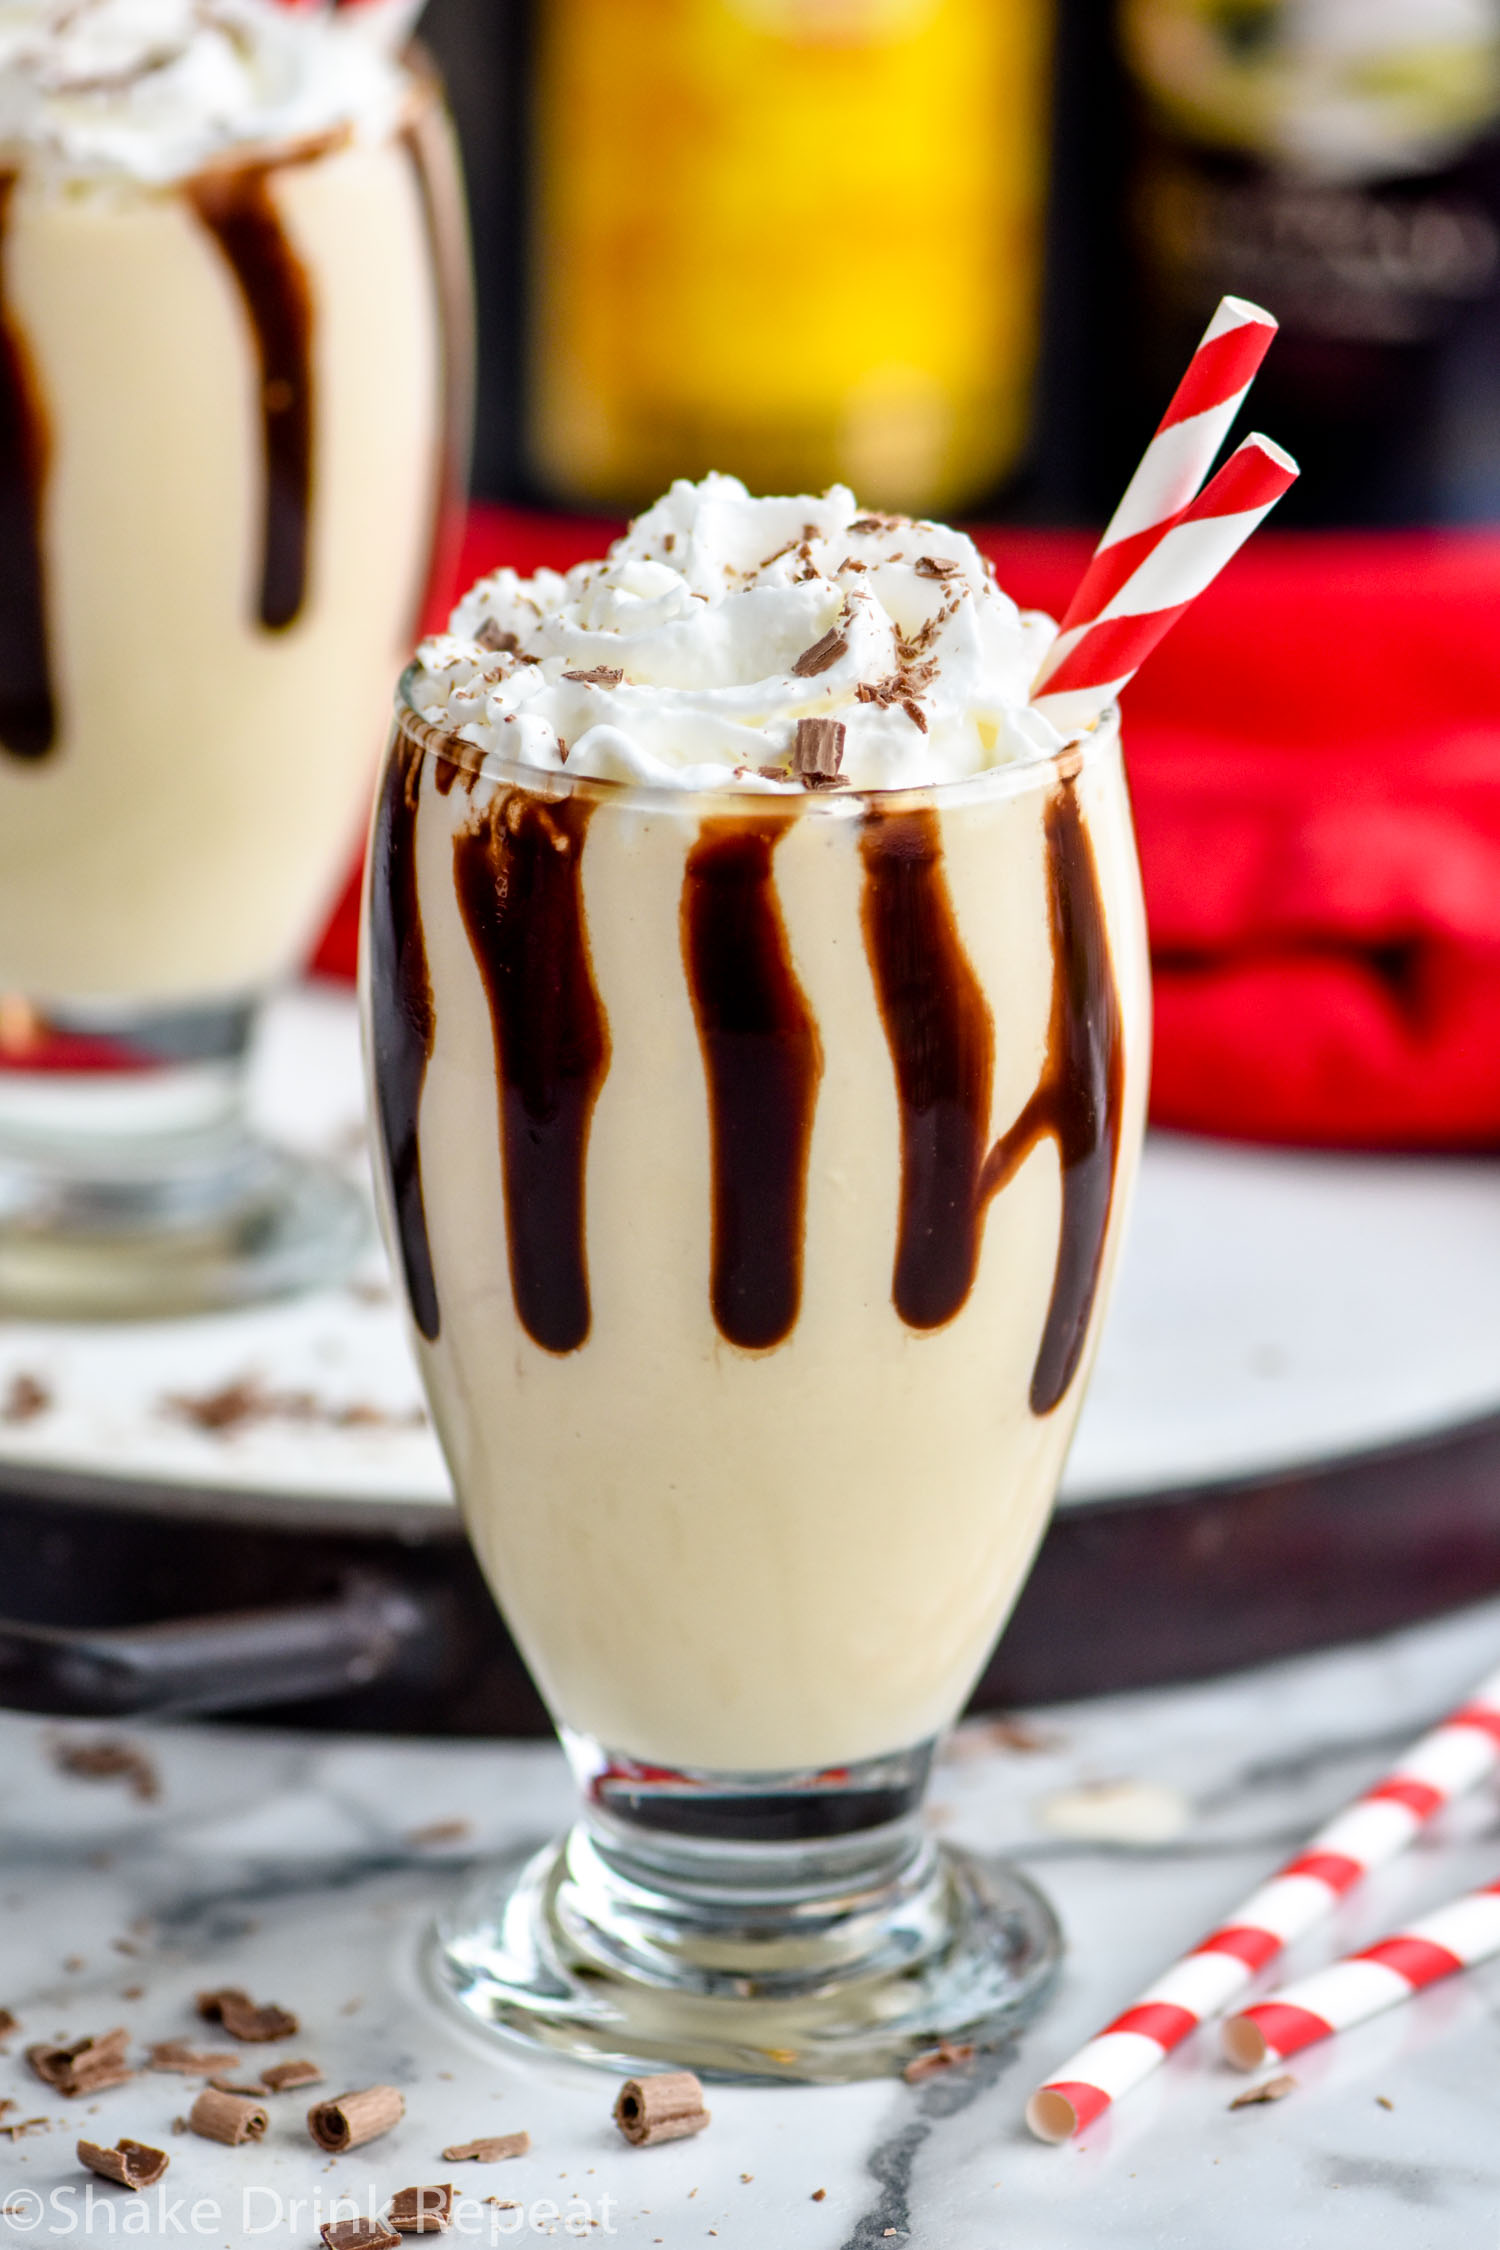 two glasses of Frozen Mudslide with chocolate drizzle, whipped cream, two straws and bottles of Kahlua and Baileys in the background